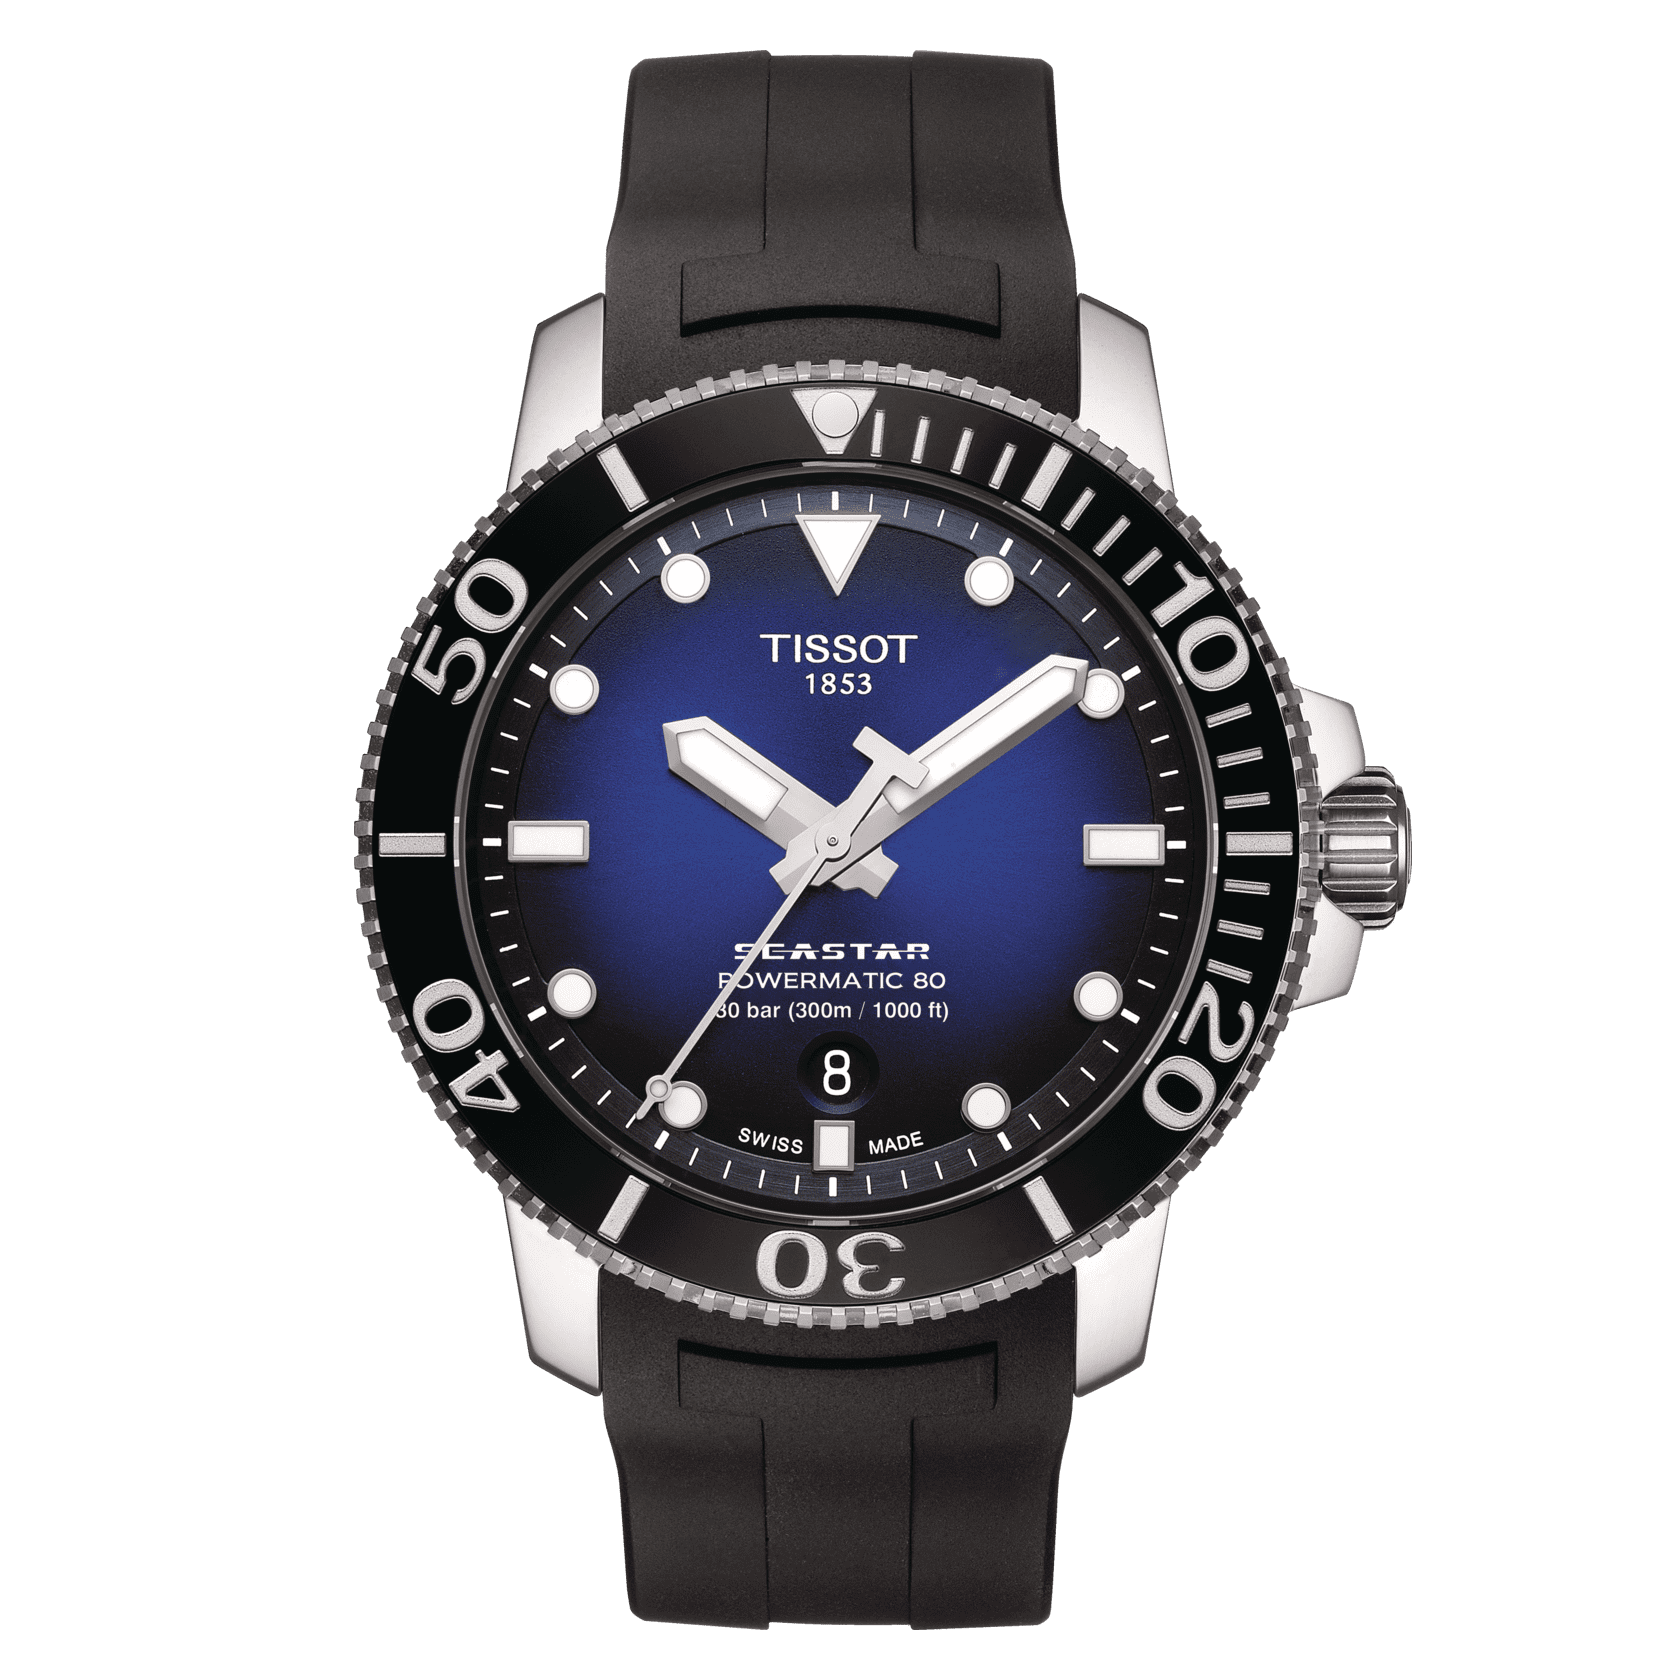 Replica Watches For Sale In USA